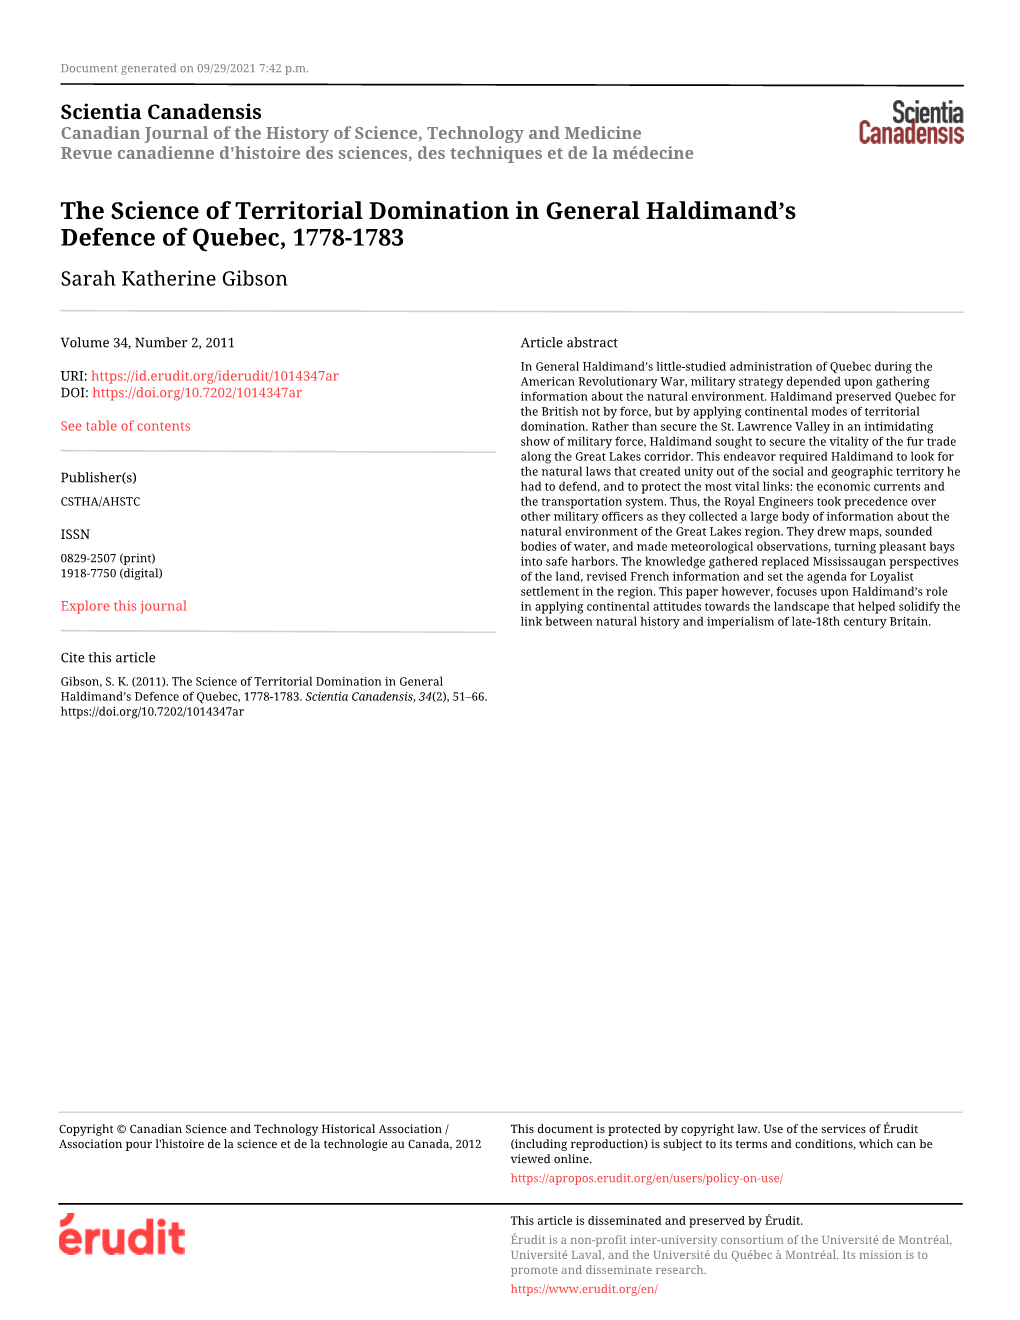 The Science of Territorial Domination in General Haldimand's Defence Of